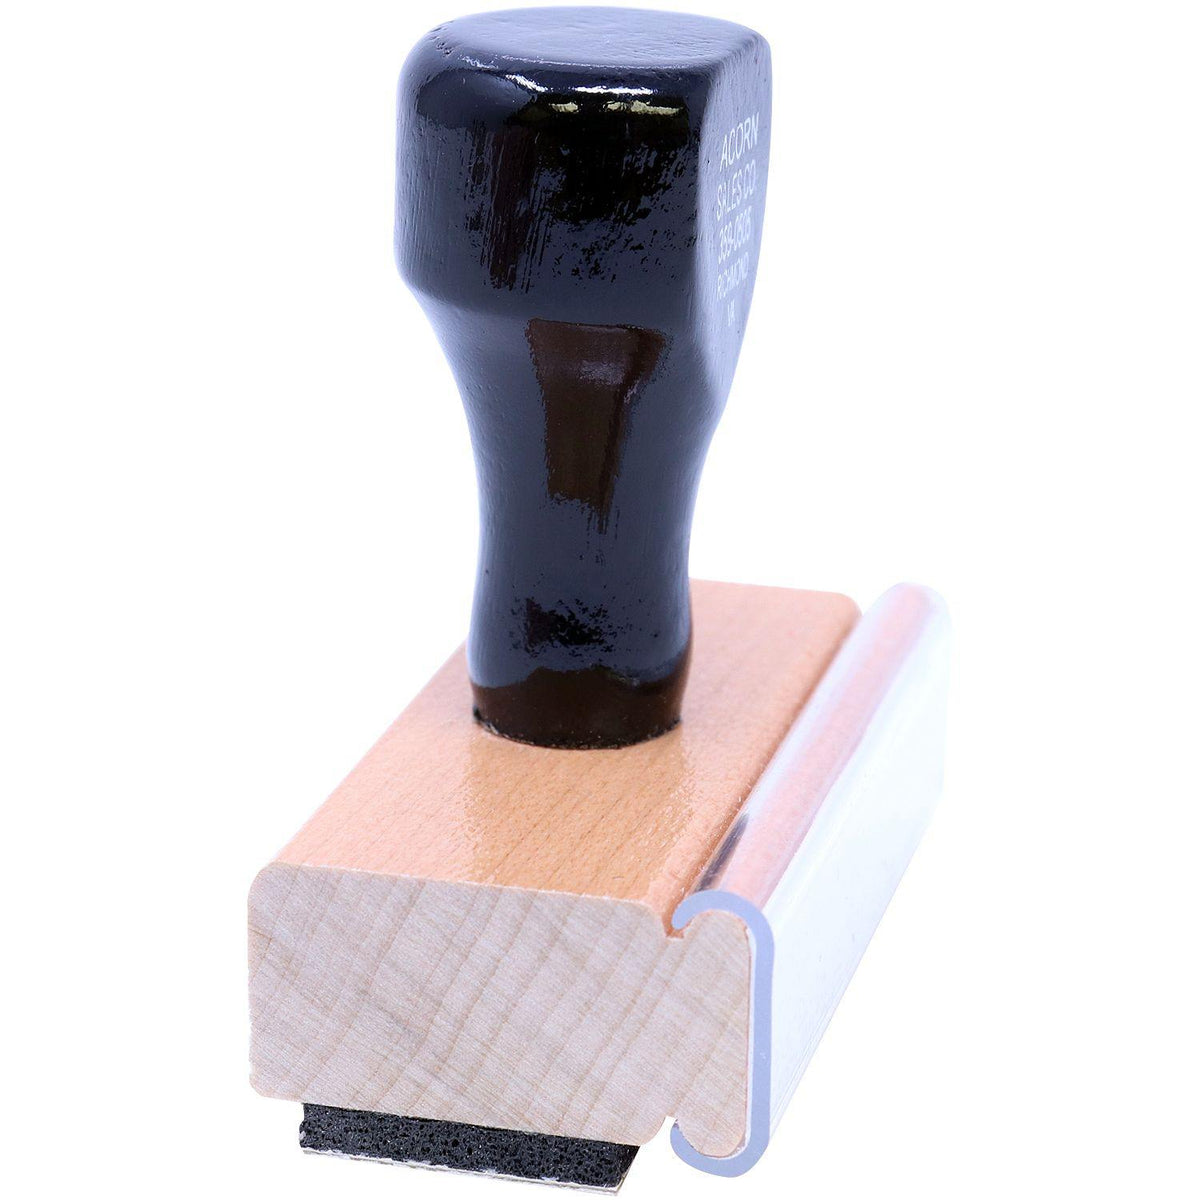 Side View of Large Secondary Insurance Rubber Stamp at an Angle